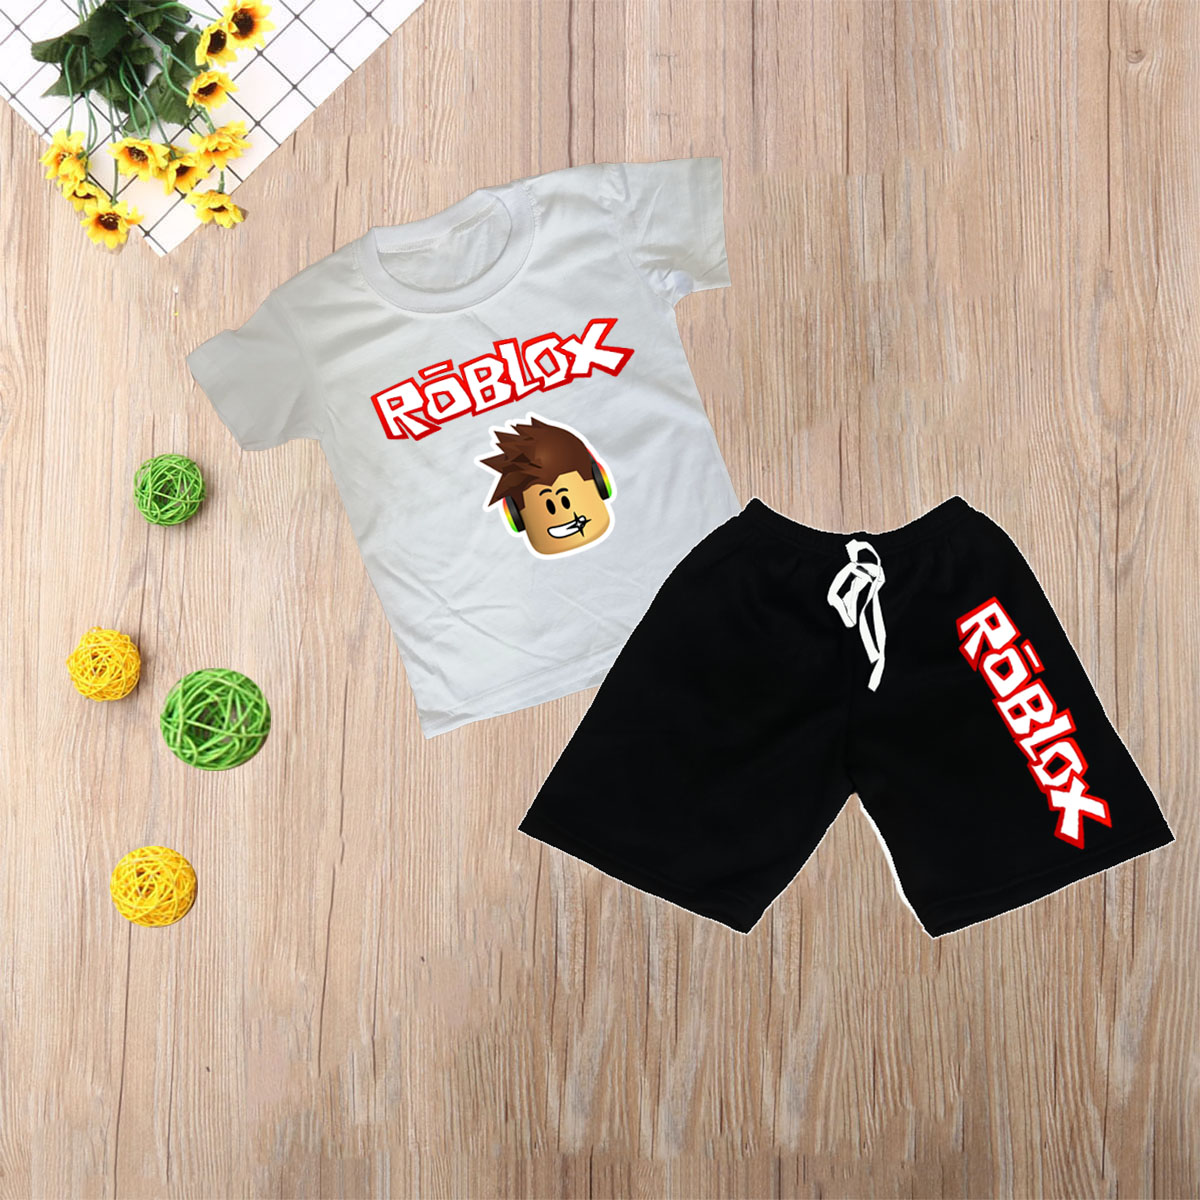 Roblox T-Shirt Jogger for boys kids (1-11yrs.old small to xlarge) quality  made unisex terno